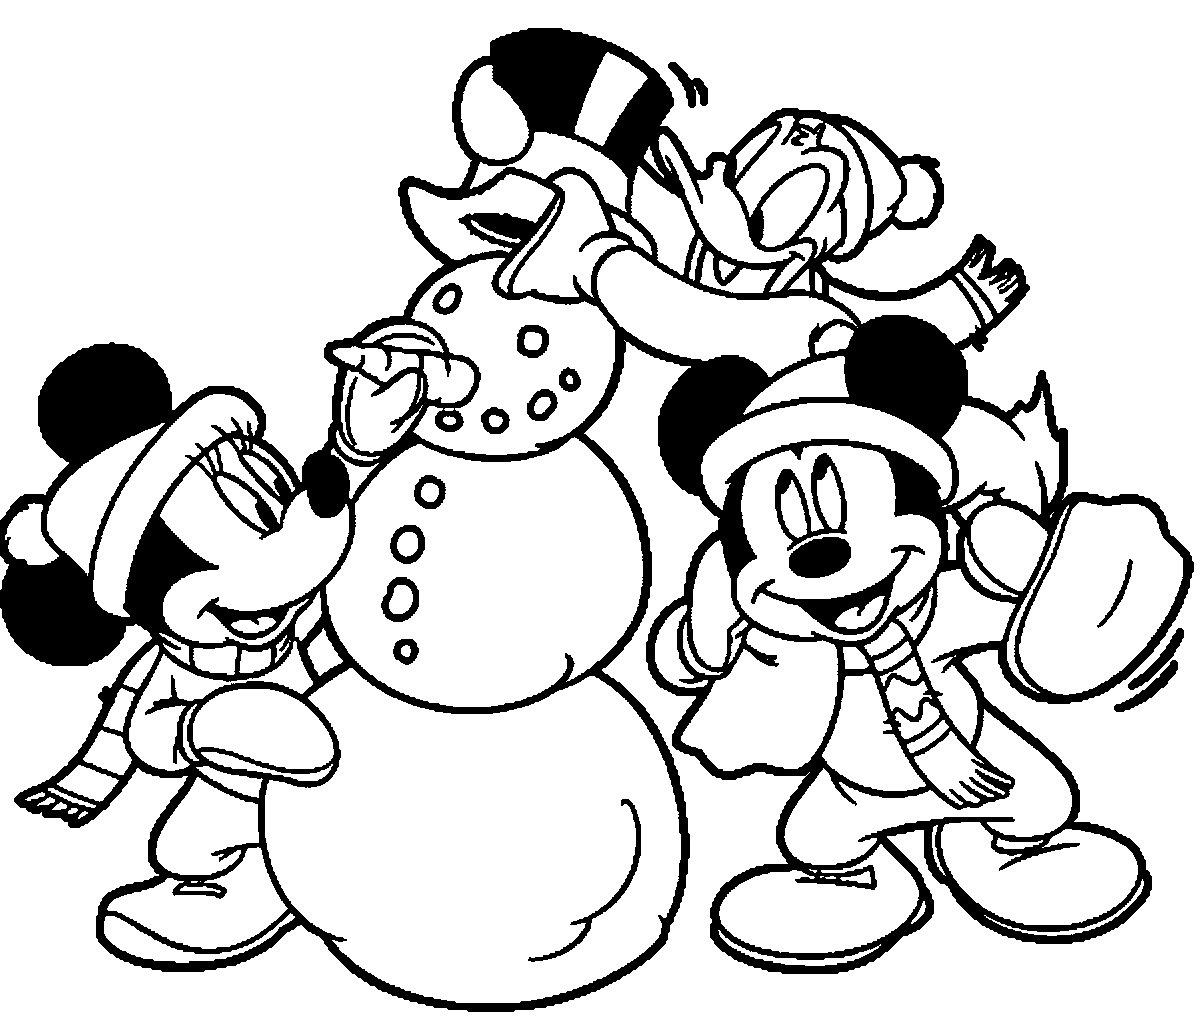 Detailed Winter Coloring Pages at GetDrawings Free download